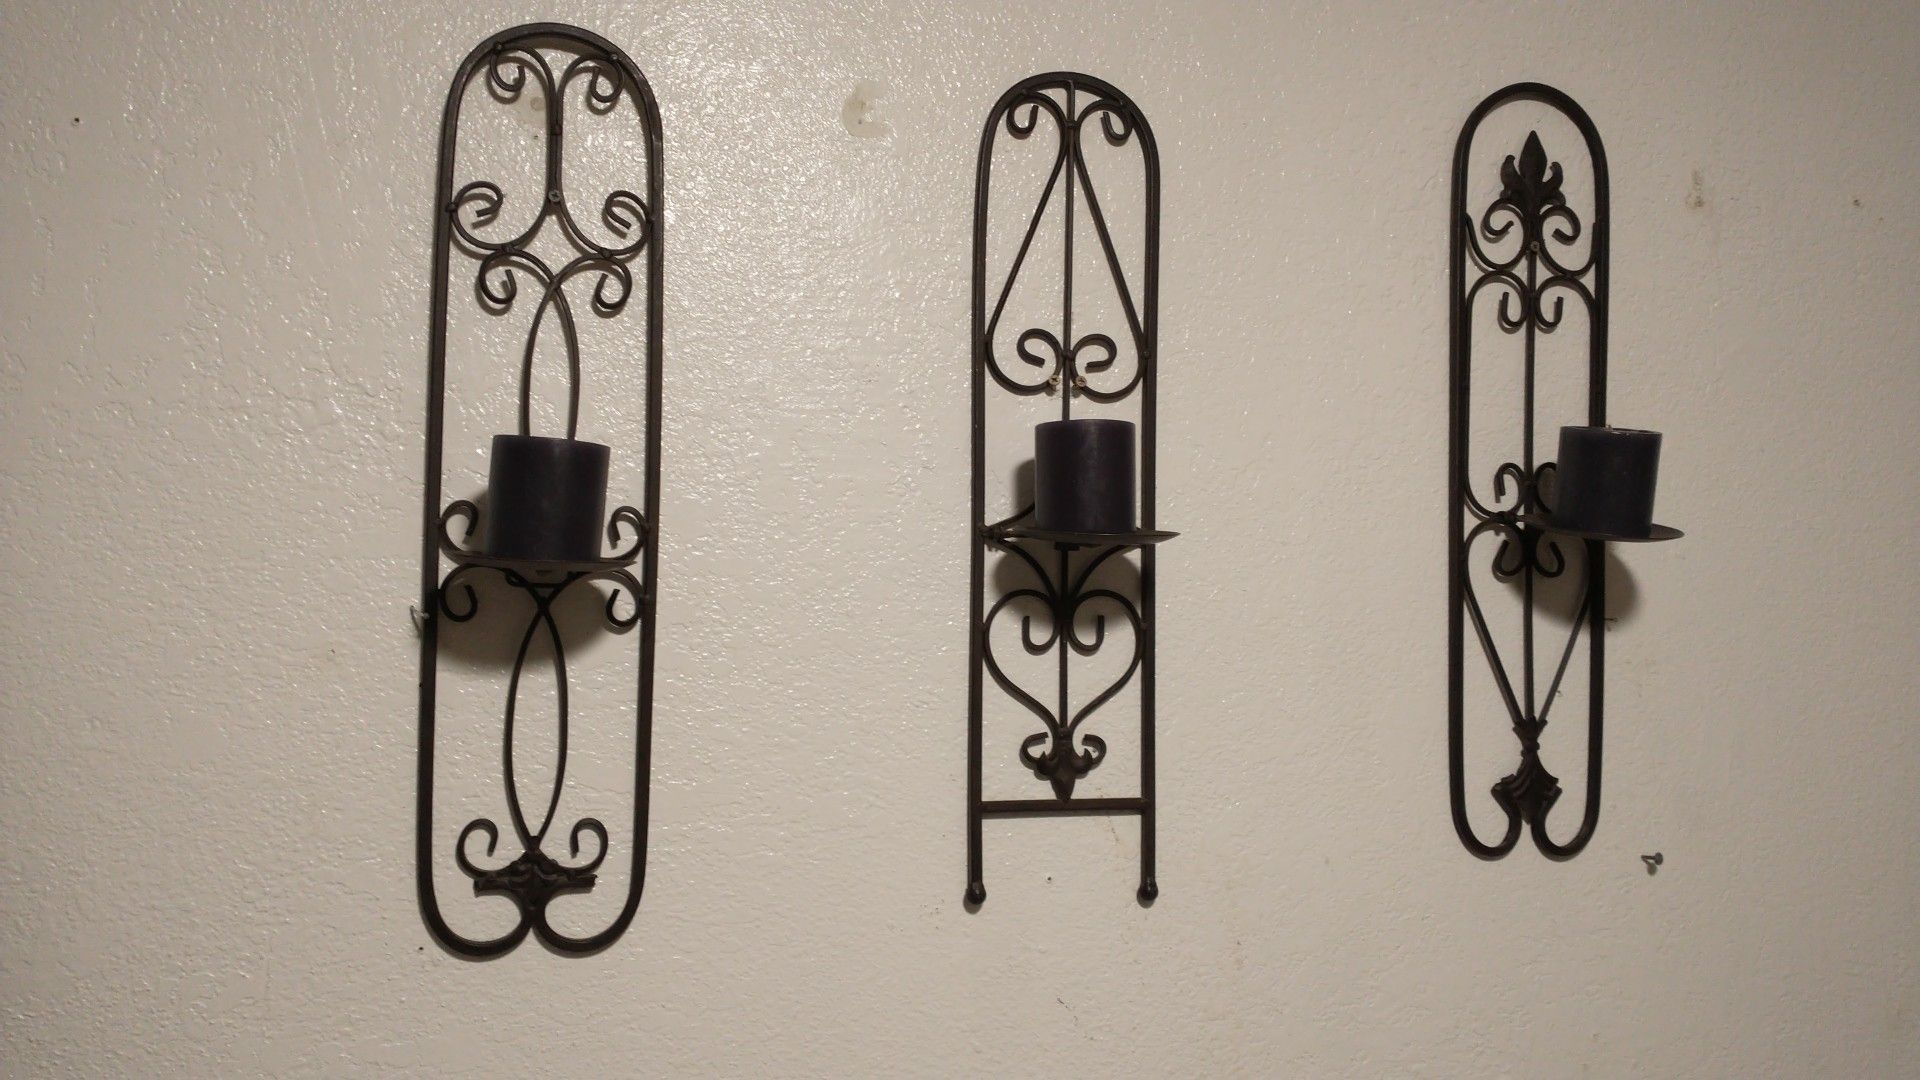 Wall decor 23 inches long just the candle holders